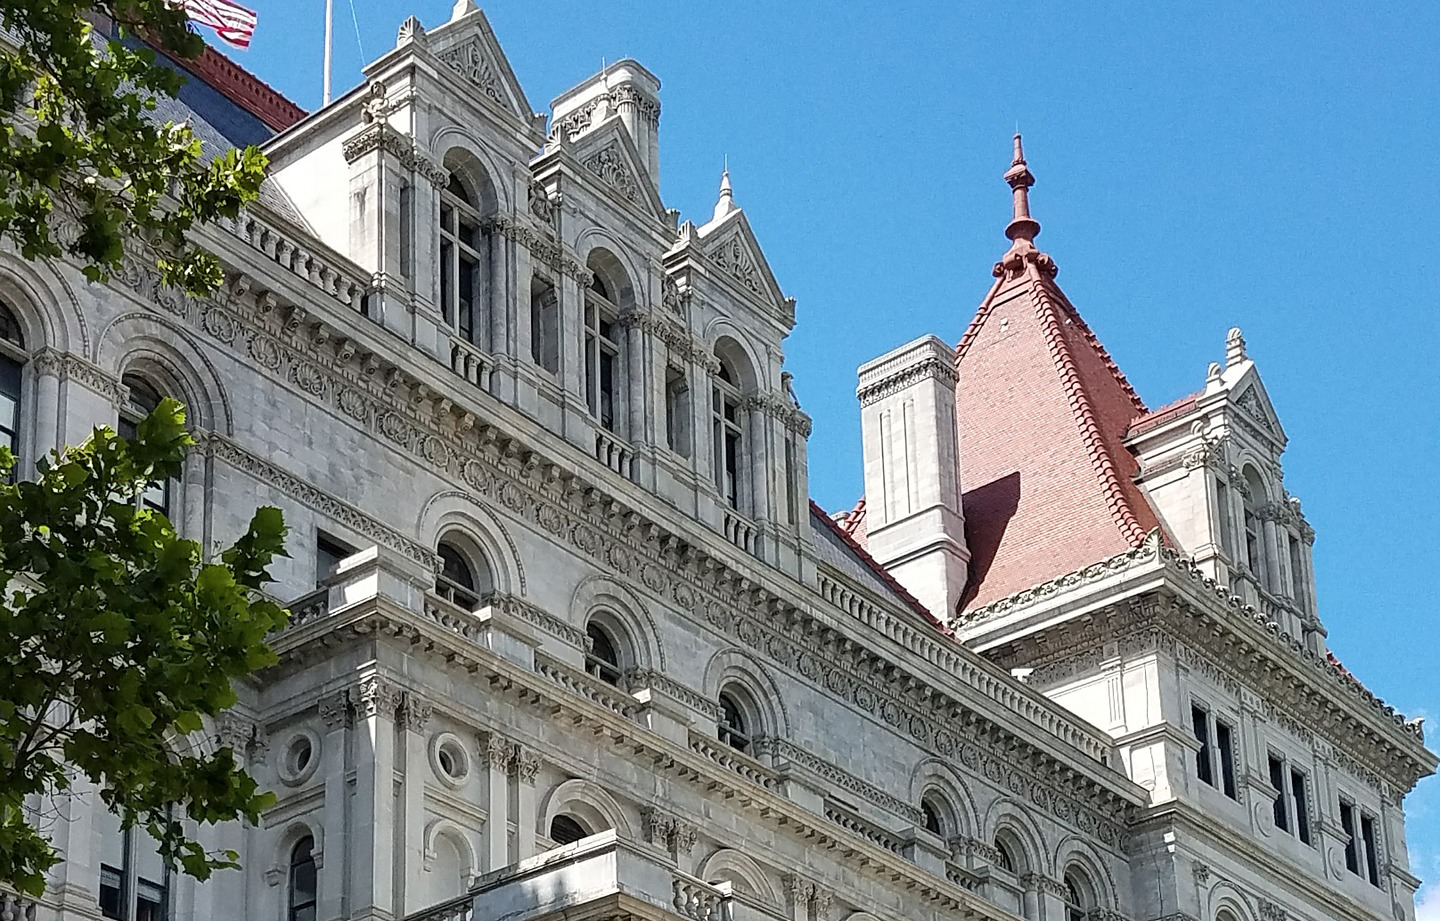 Detail of the NYS Capitol building